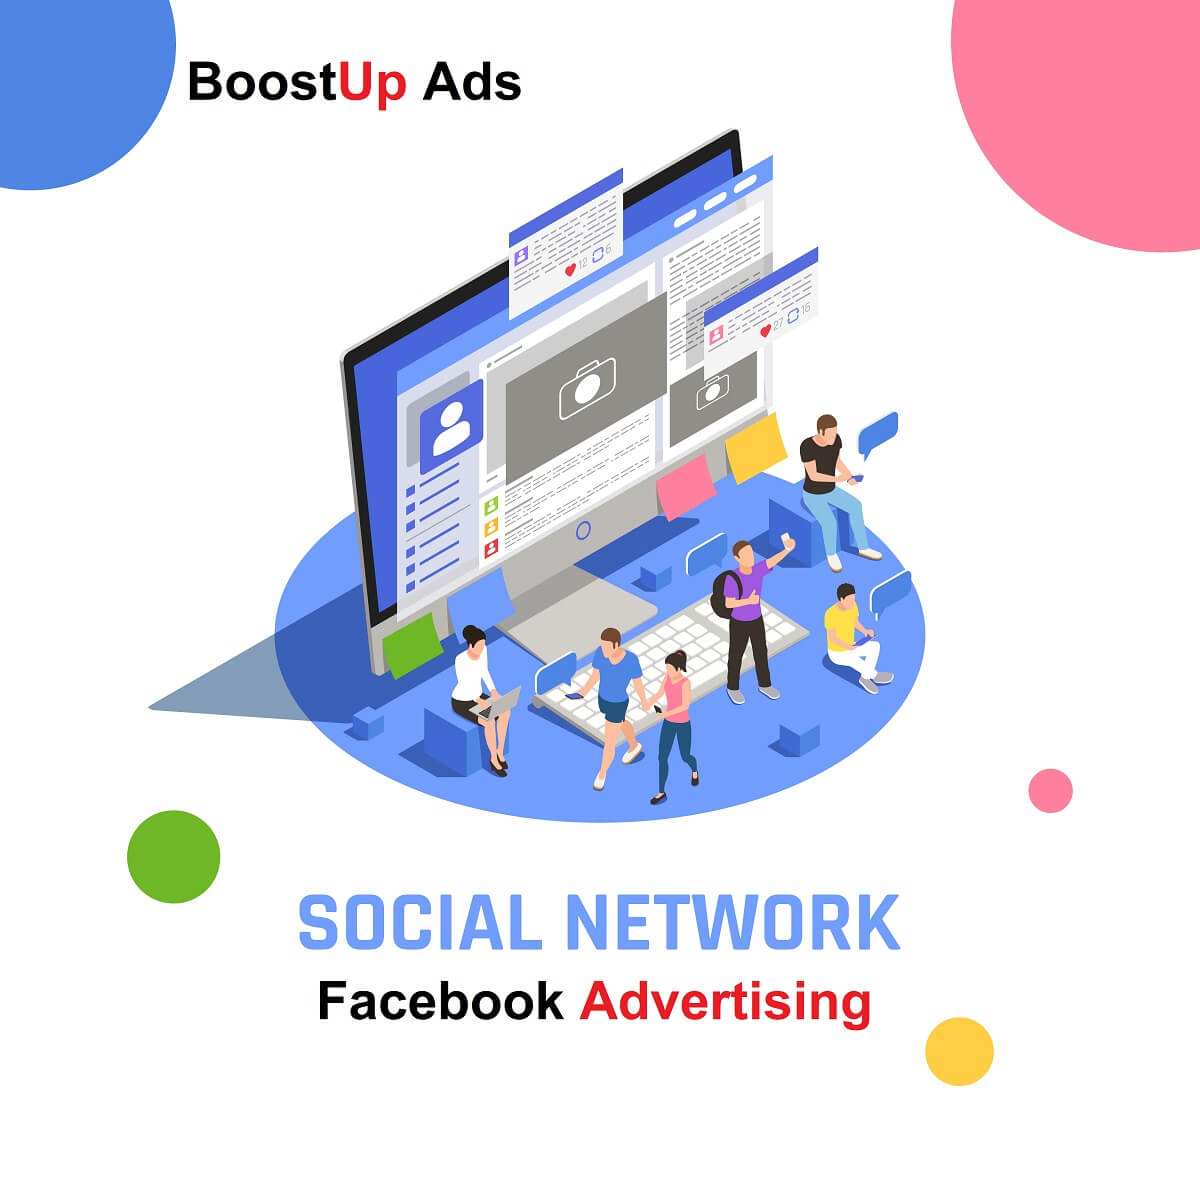 Facebook Advertising in Bangladesh by BoostUp Ads